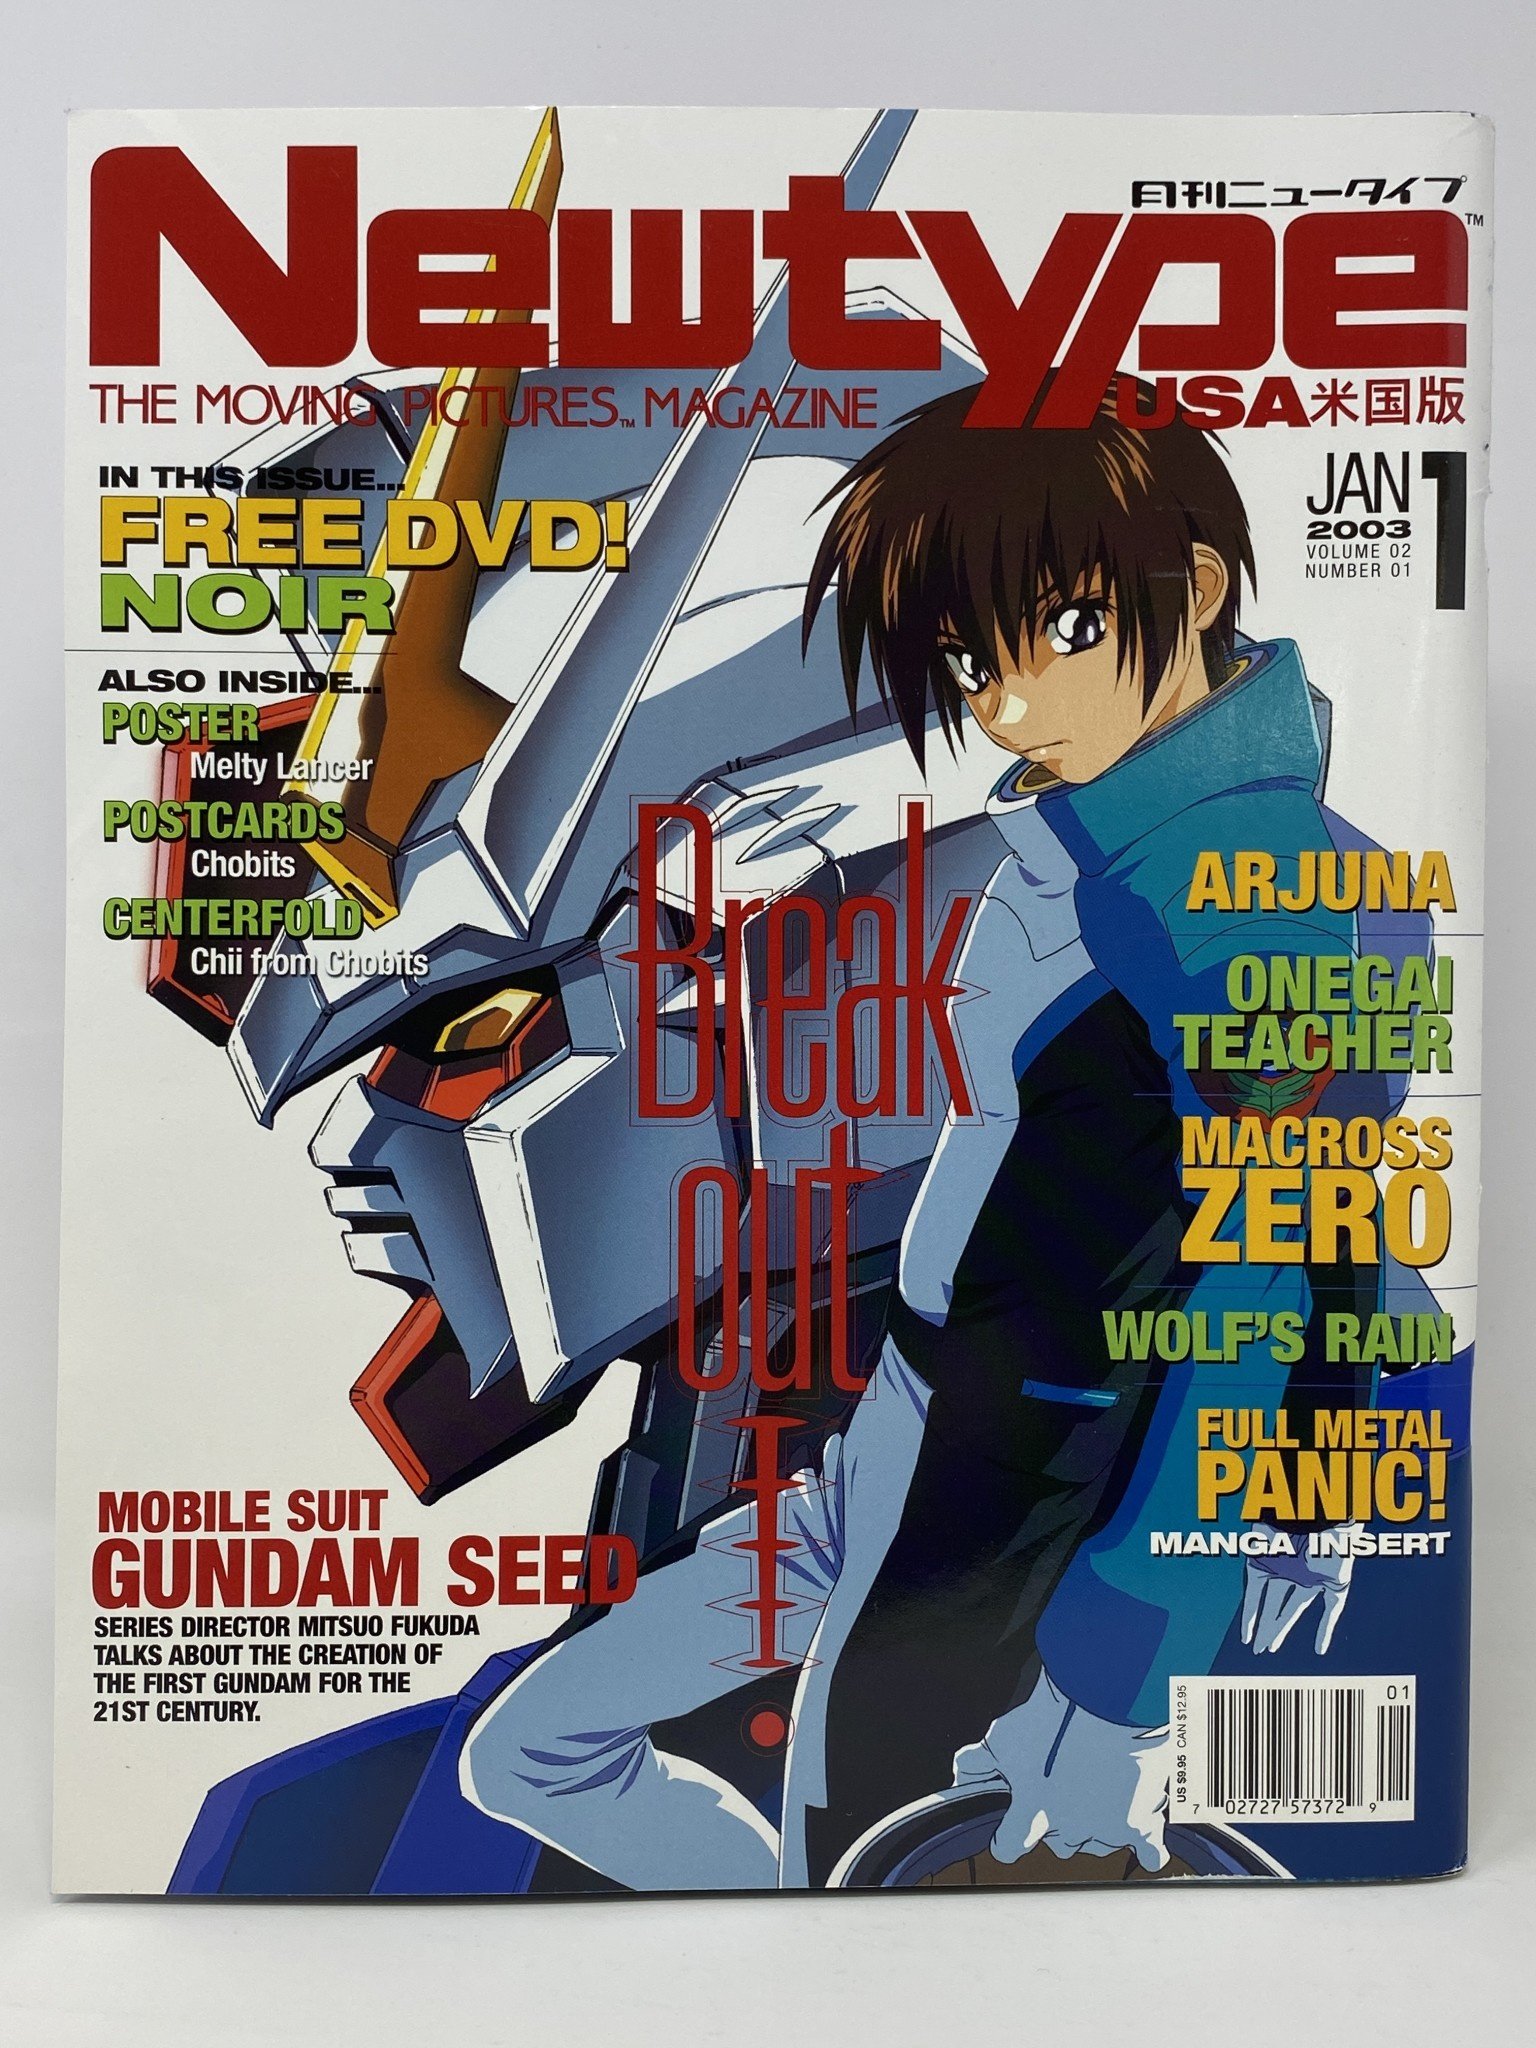 Otaku USA Magazine on Twitter The new issue of Anime USA is out now SAO  Alternative Kakegurui Haikyu and much more Grab it in stores or  online httpstcoQKYquLbhEB httpstcopBta9wZFQ5  Twitter